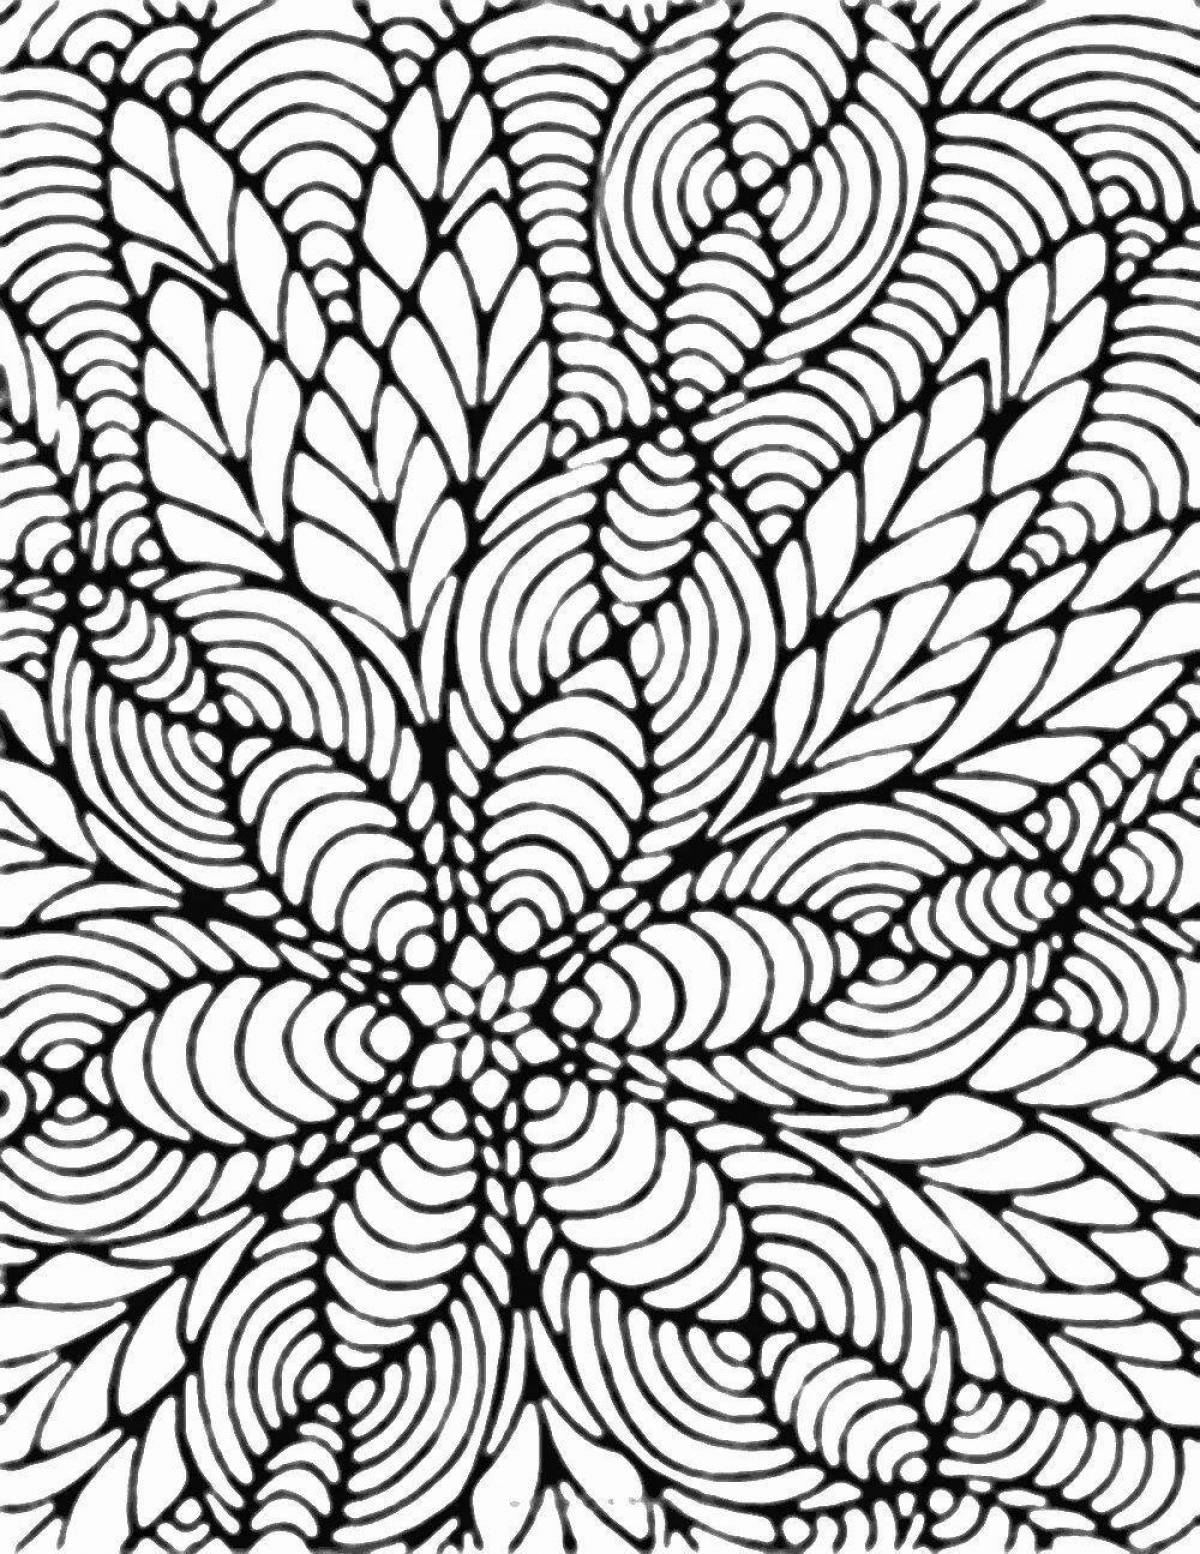 Quirky simple adult coloring book